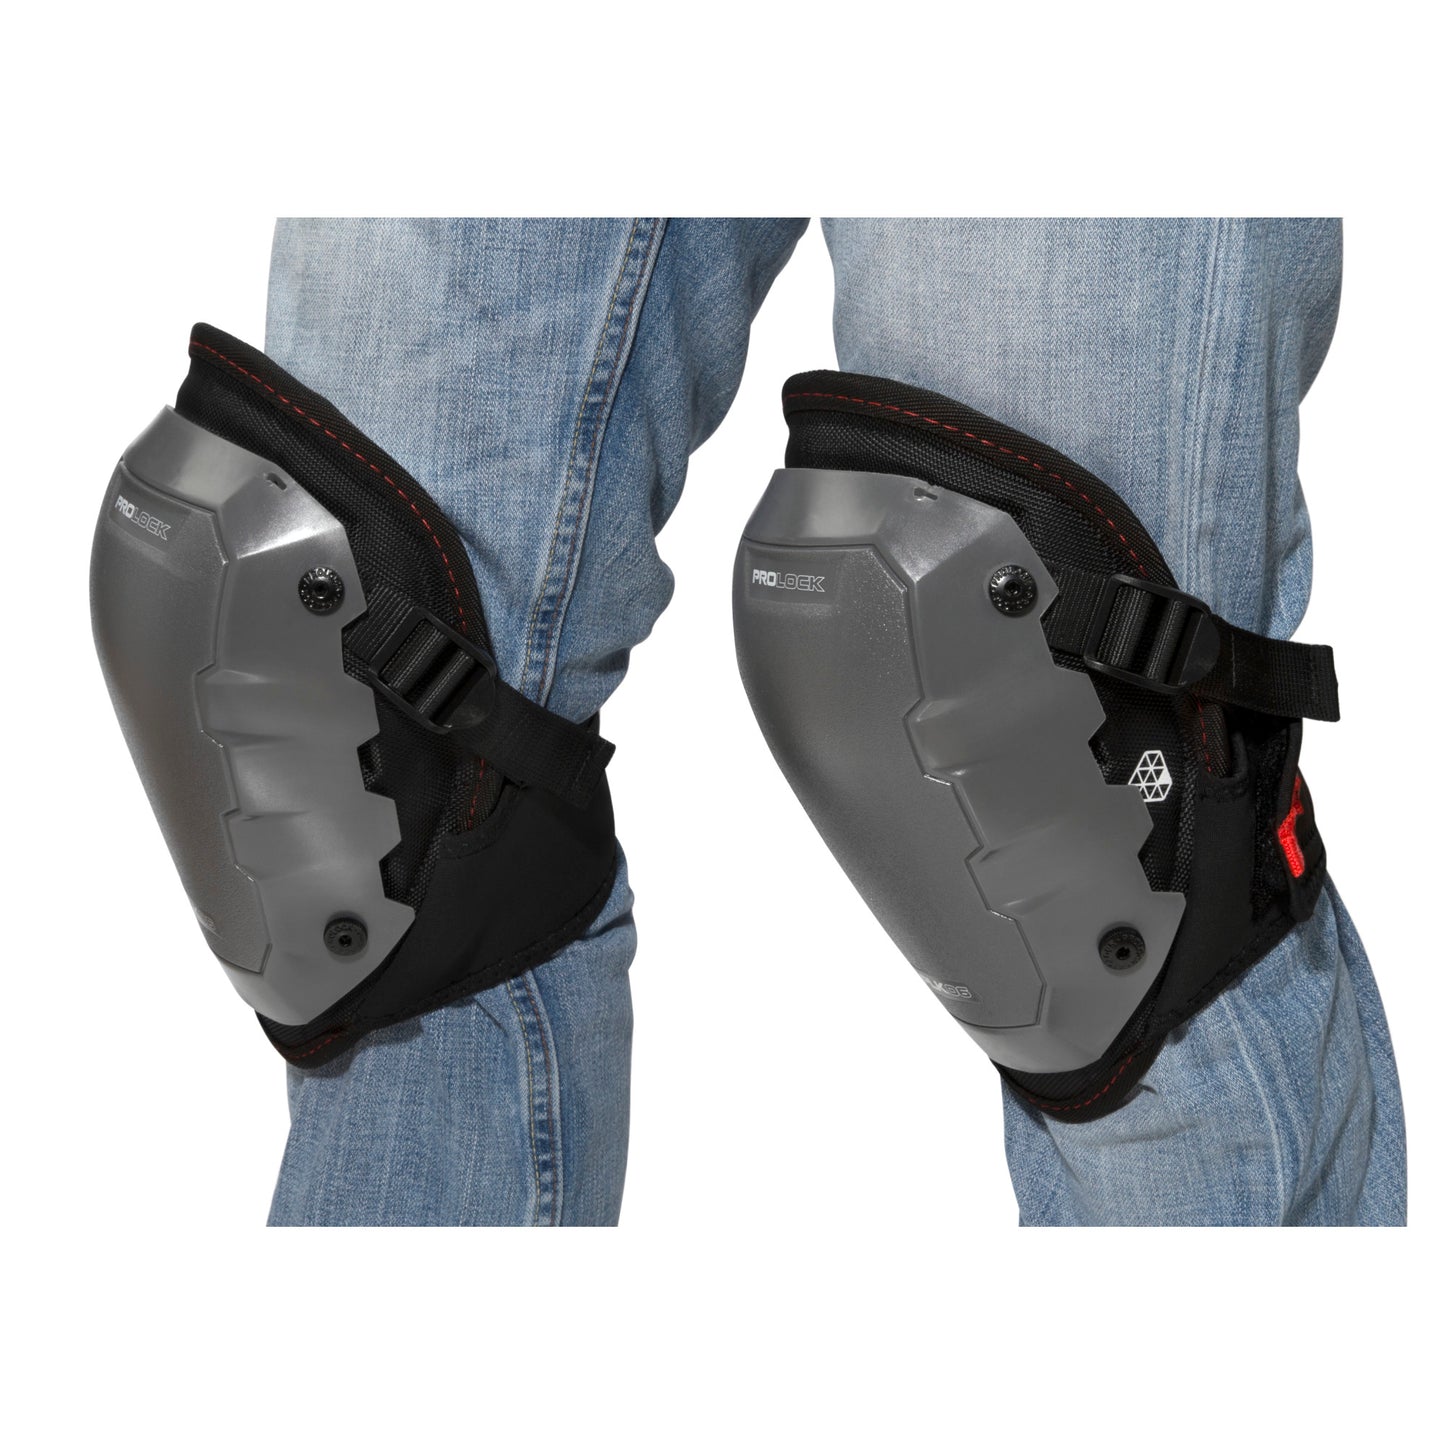 2-Piece Foam Knee Pad and Non-Marring Cap Attachment Combo Pack